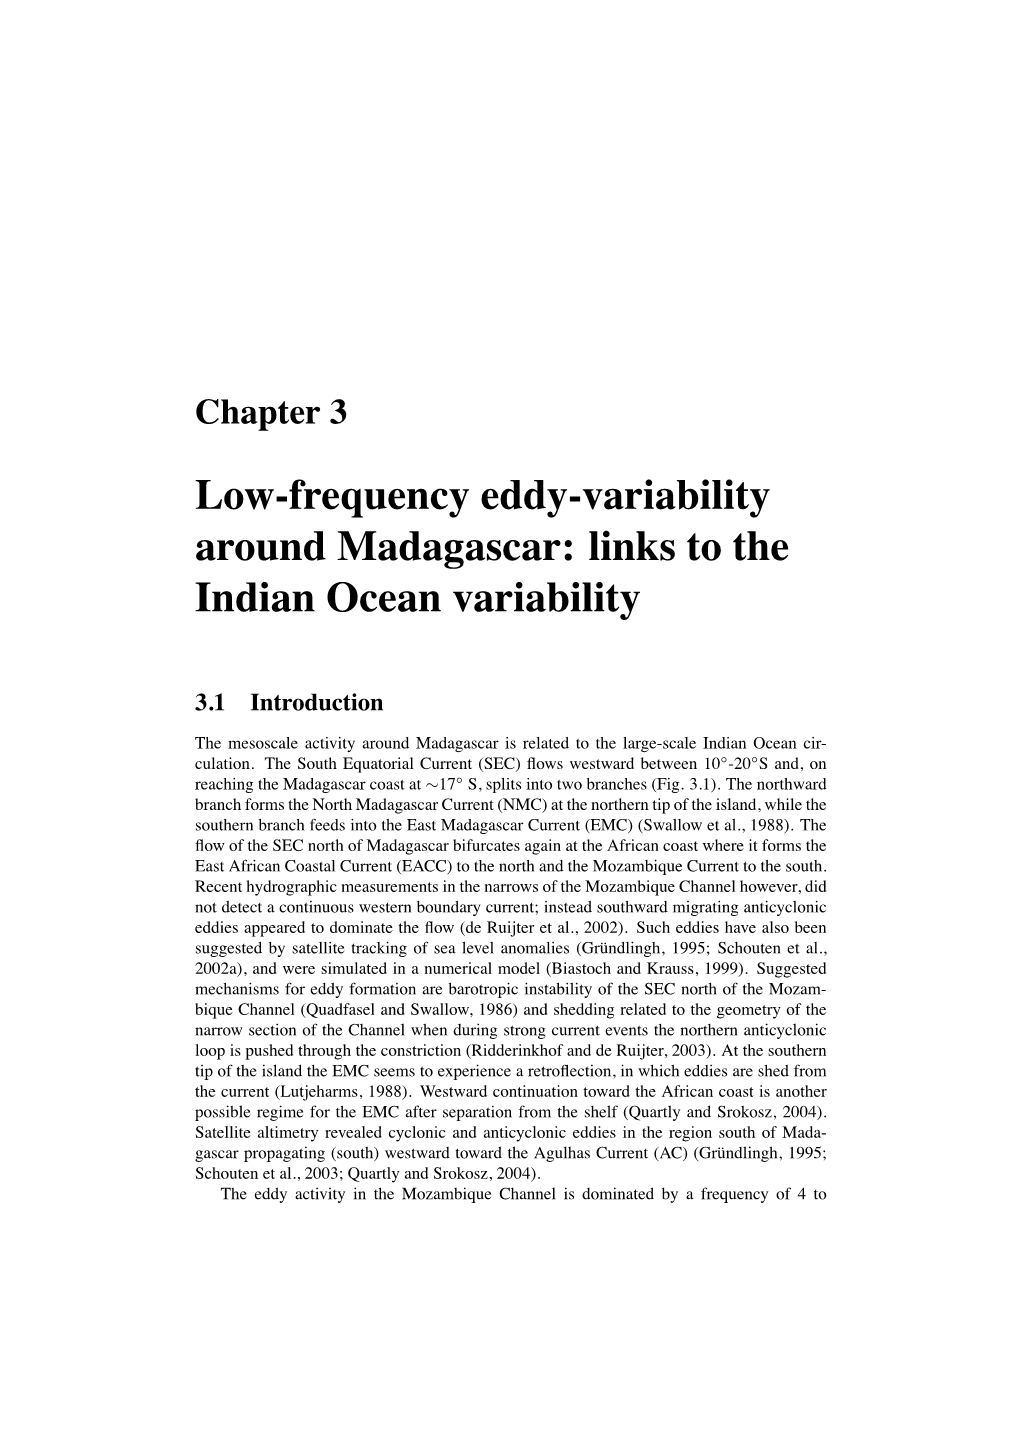 Low-Frequency Eddy-Variability Around Madagascar: Links to the Indian Ocean Variability